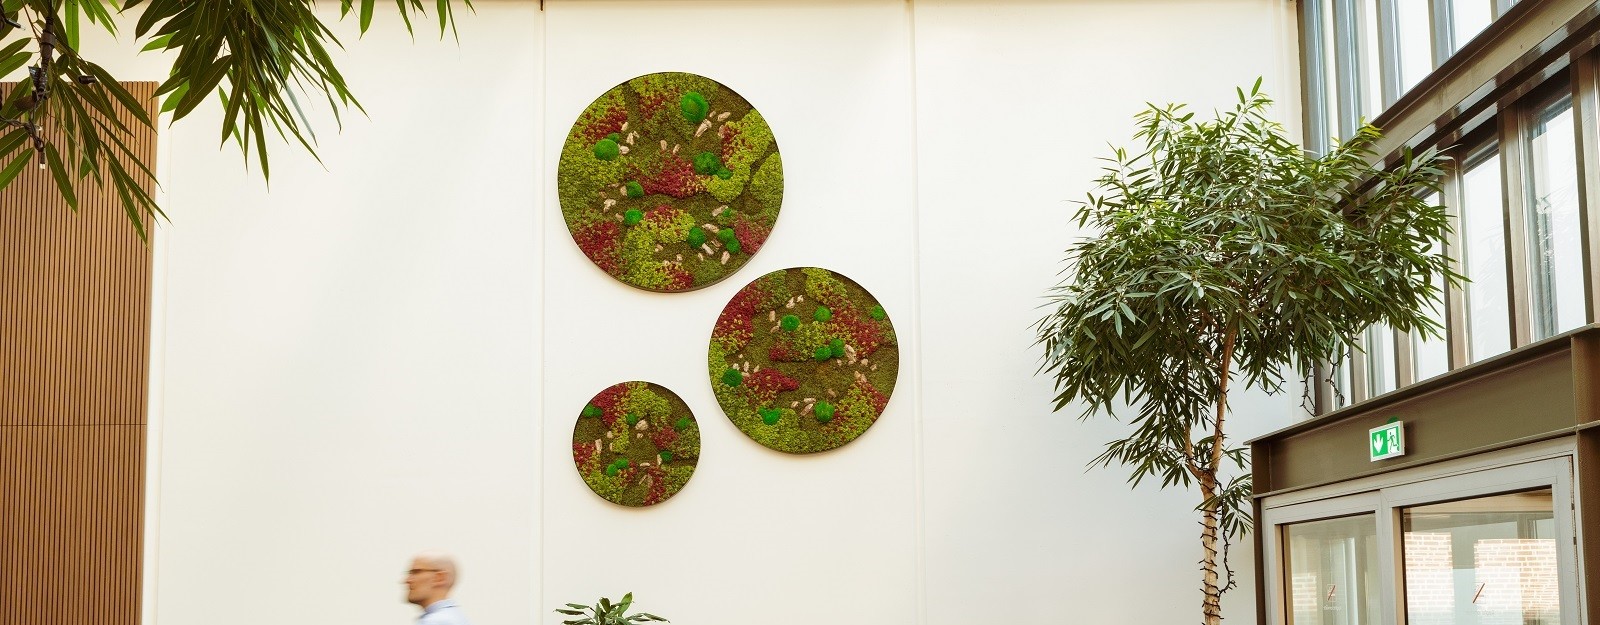 Three different sized, round moss decorations on the back wall of a lobby with a tree on the right side